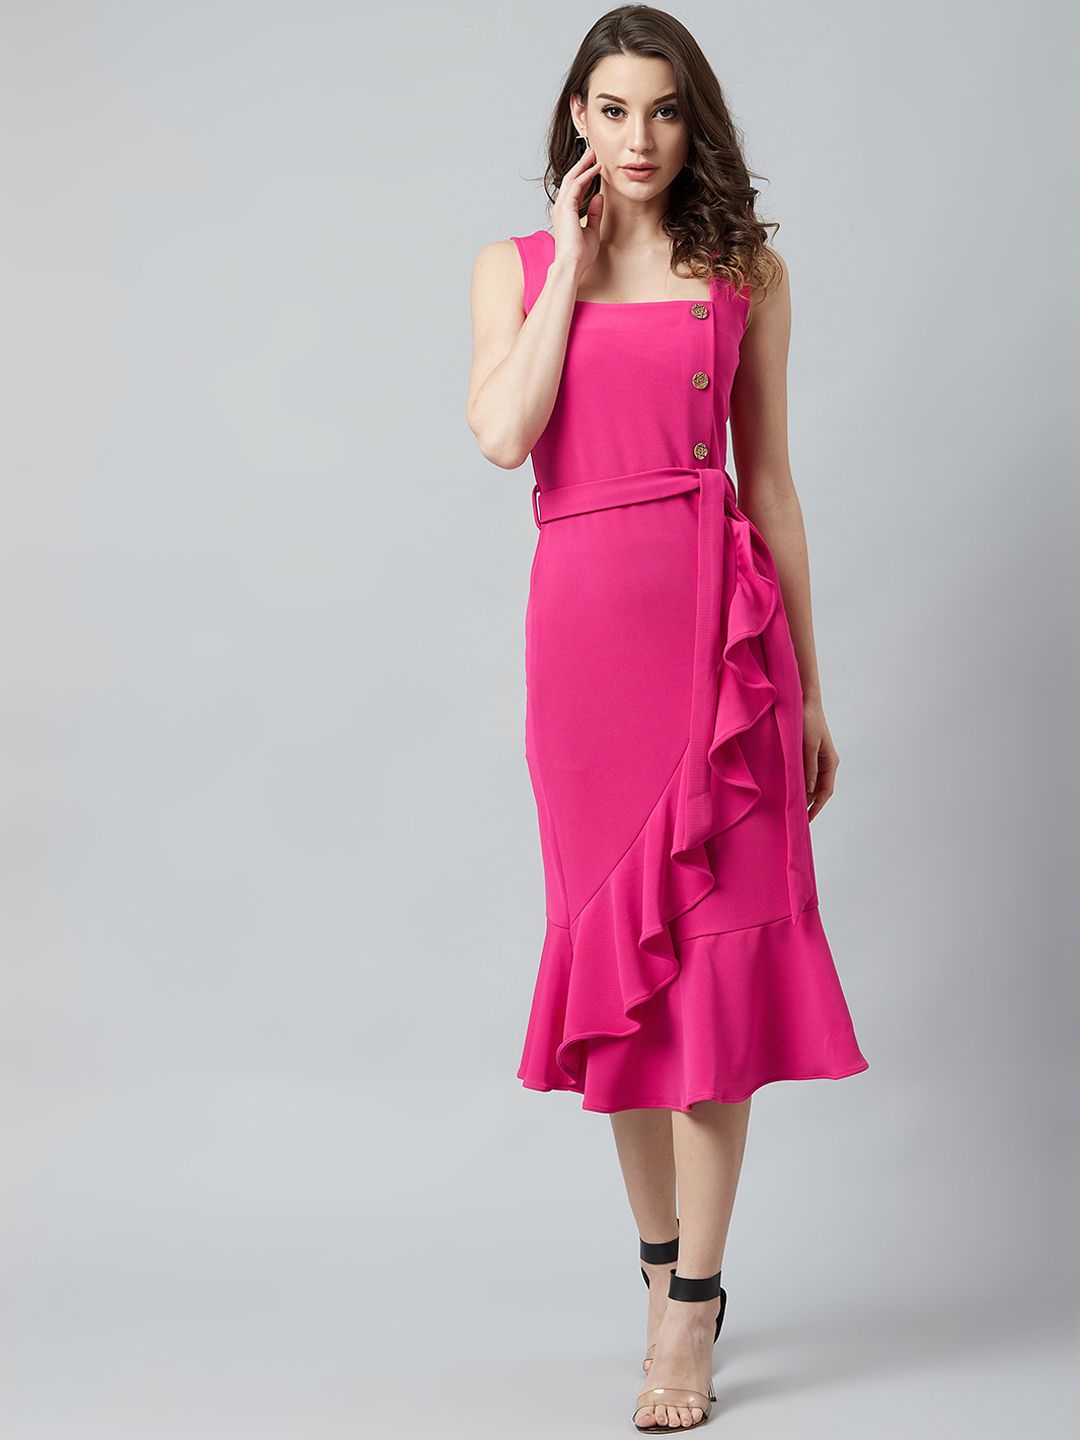 Athena Pink Solid A-Line Dress Price in India